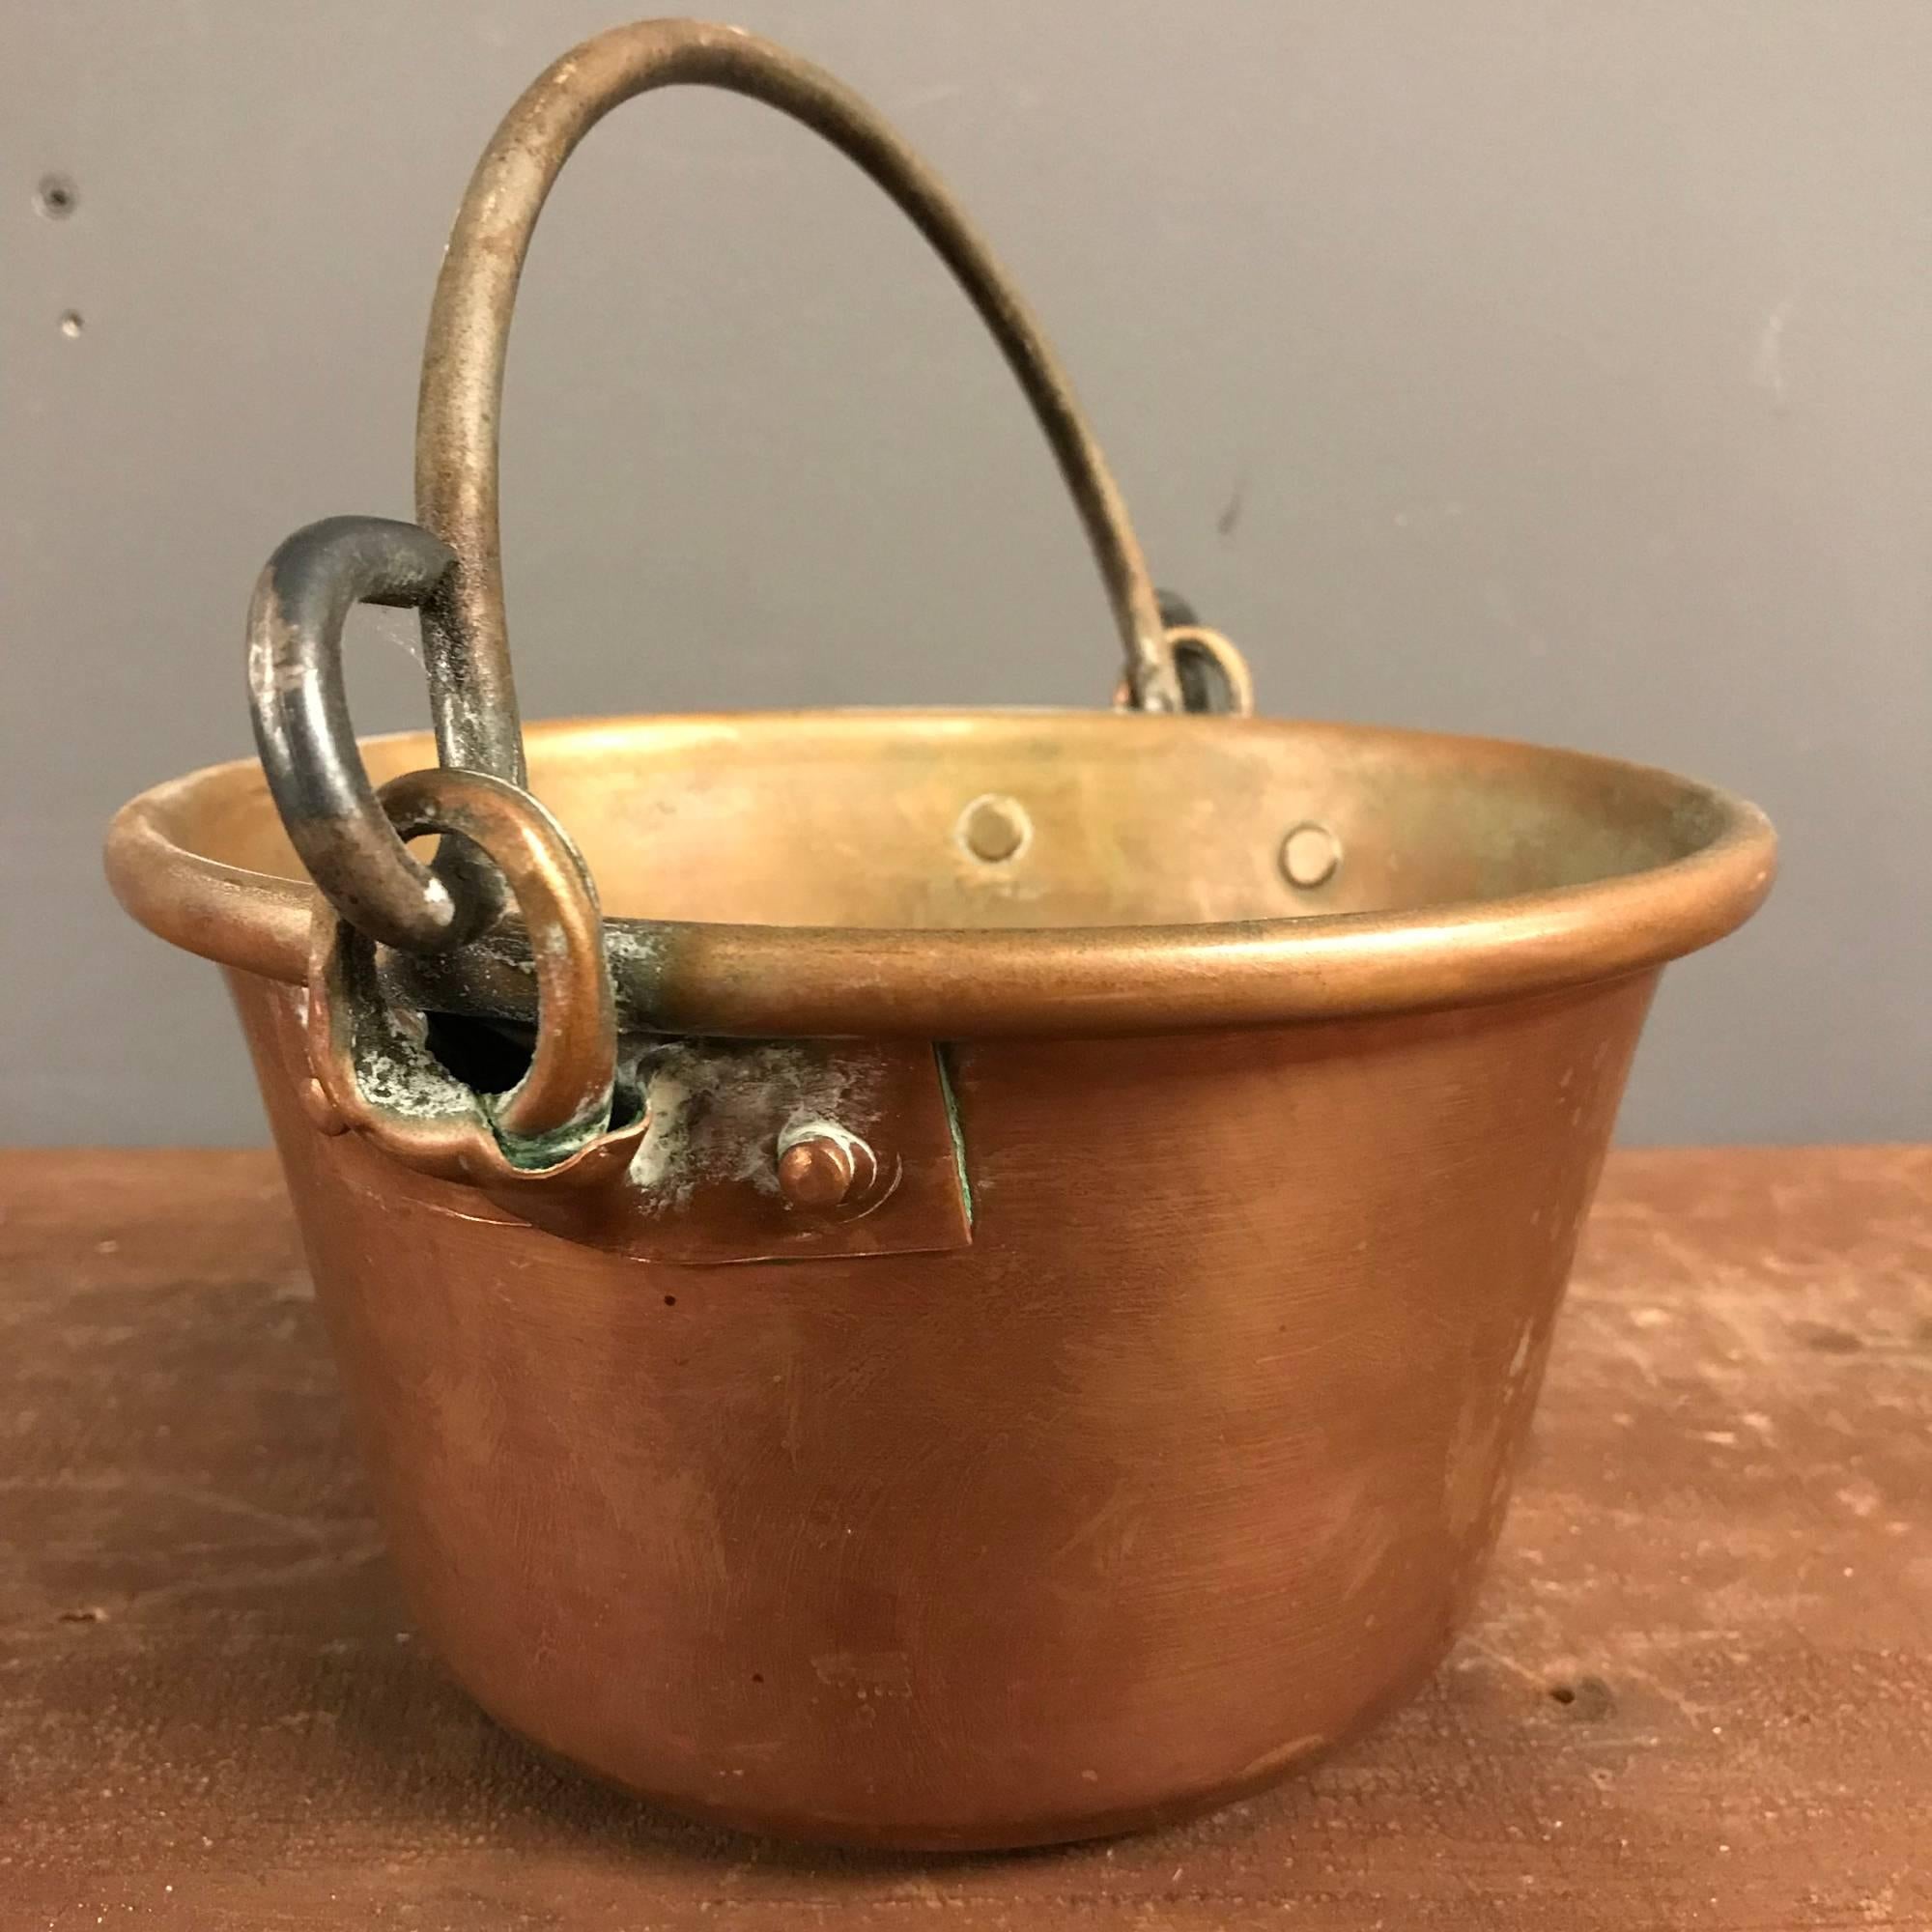 Small copper bucket. Remains in good condition.